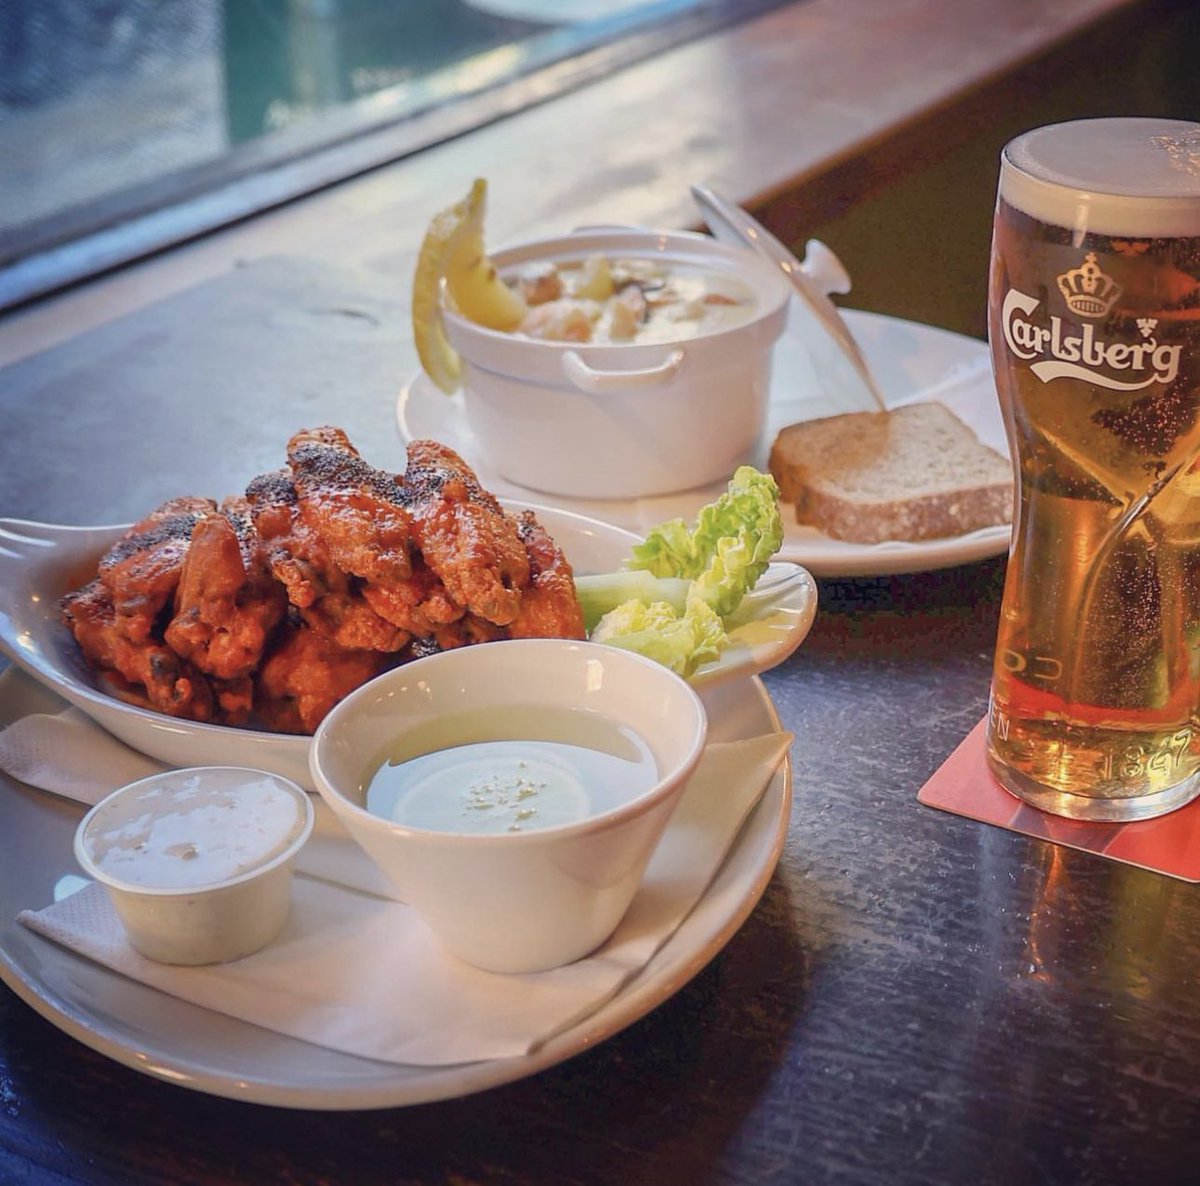 Start your week with some great food and drinks here in The Auld Dubliner 🤩

#theaulddubliner #theaulddublinerpub #templebar #dublin #dublinpubs #templebardublin #pints #irishpub #ireland